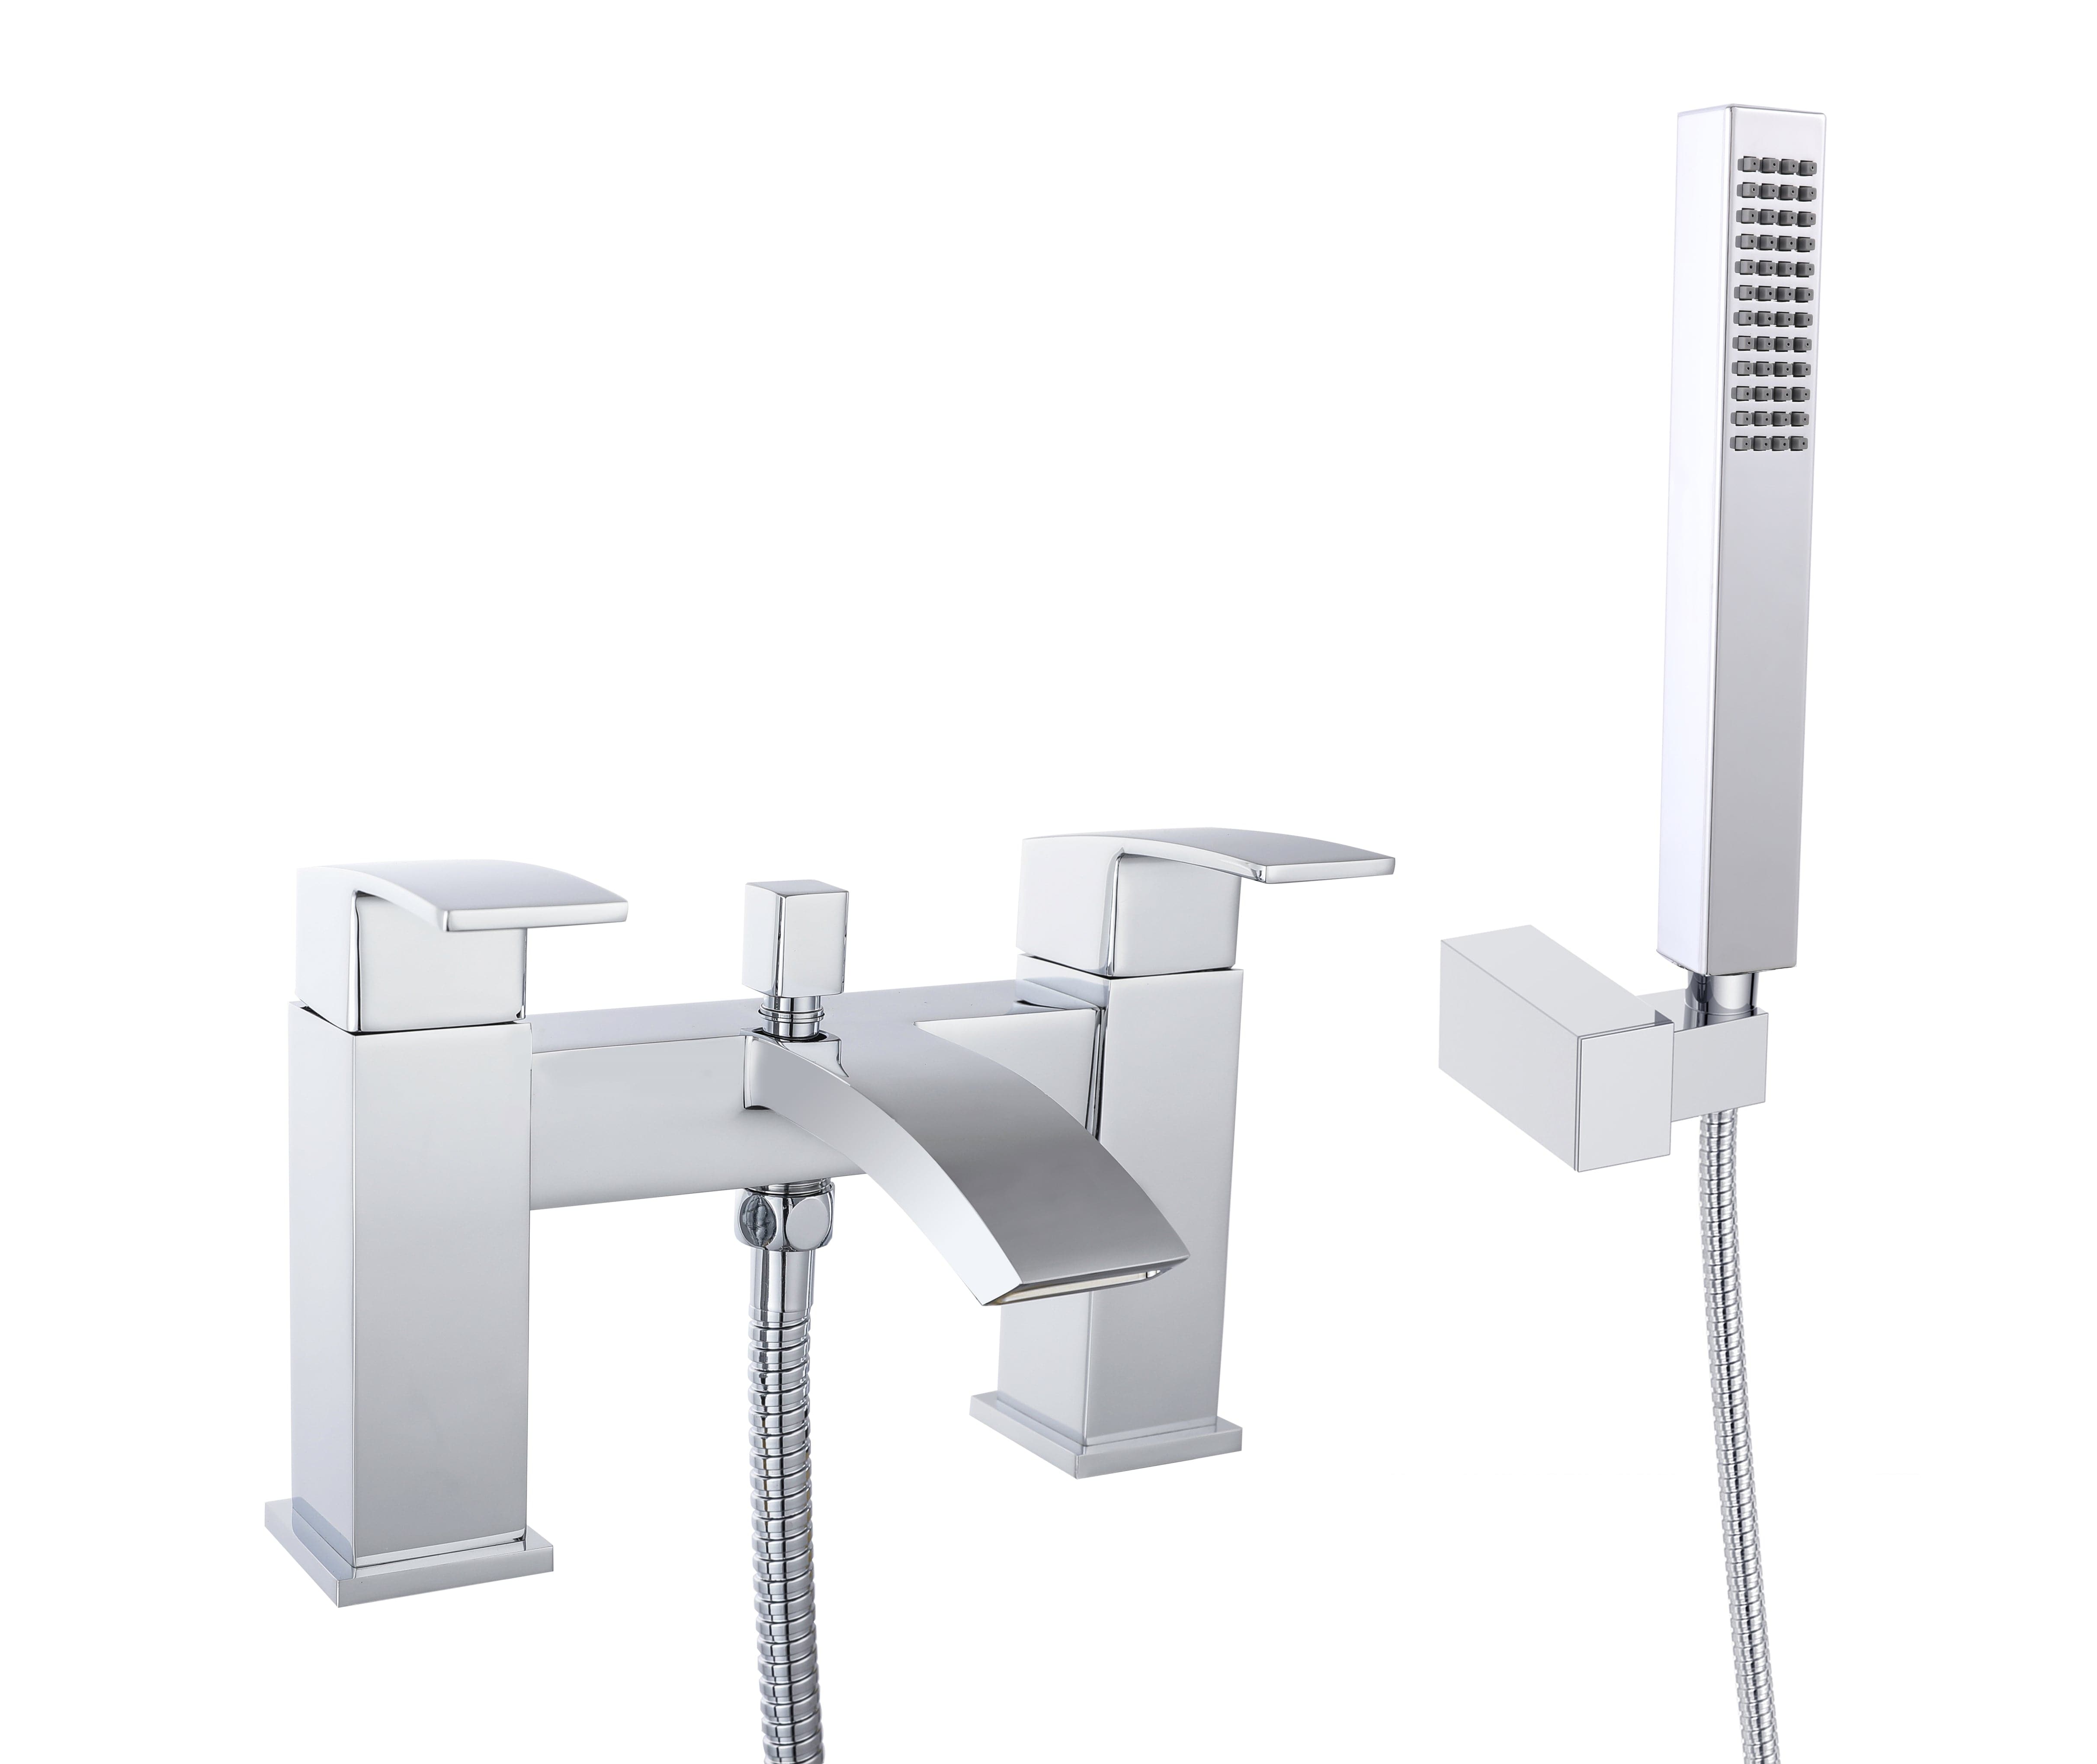 Trace Bath Shower Mixer Tap with Kit - Chrome. Stylish bathroom shower mixer, chrome finish, modern design. Buy now for UK homes.